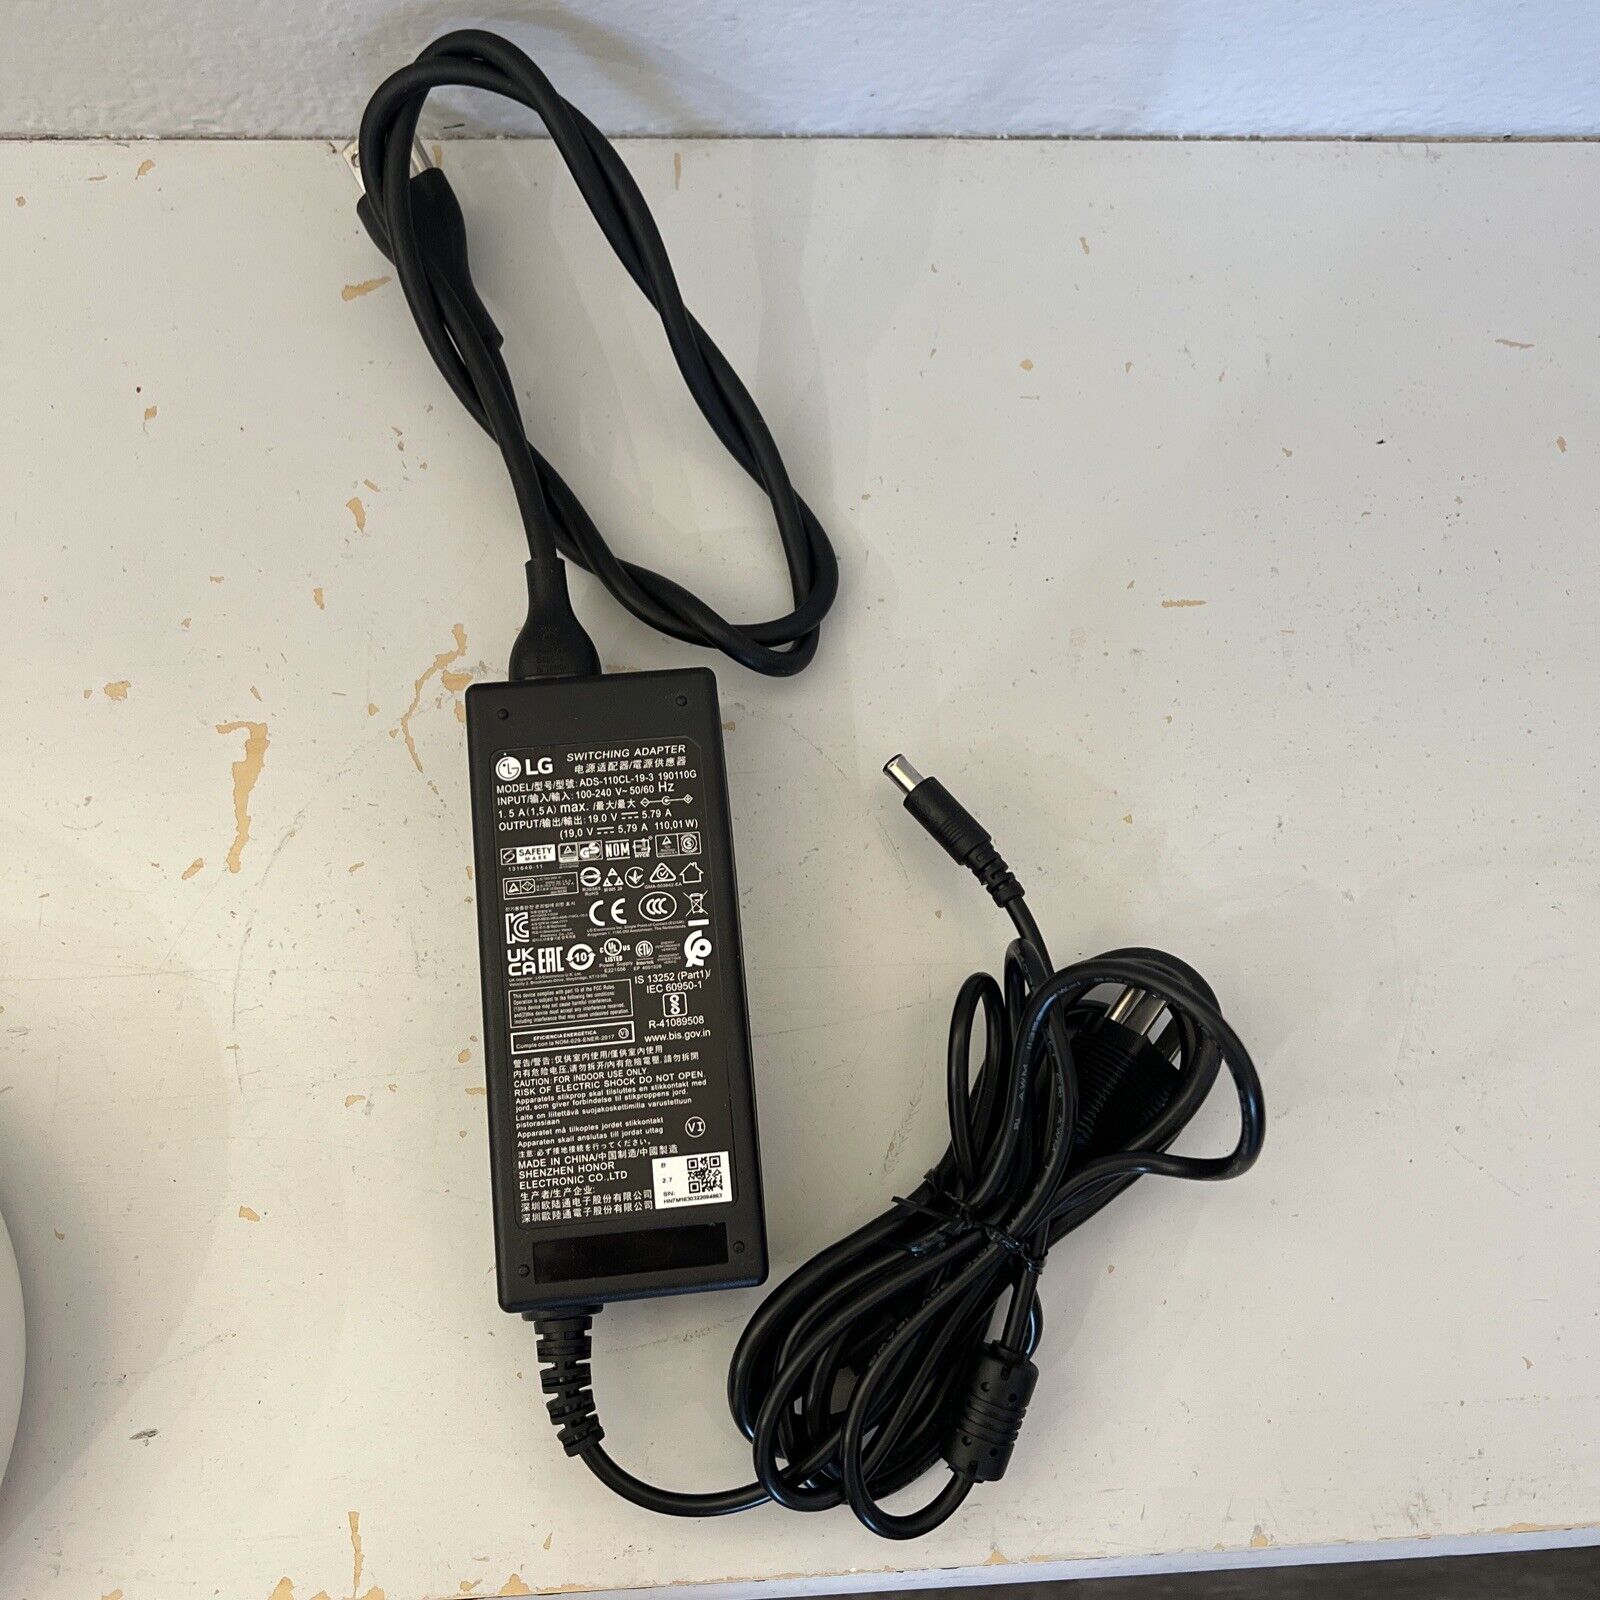 Genuine LG ADS-110CL-19-3 190110G AC Adapter for Monitors 19V 5.79A 110W